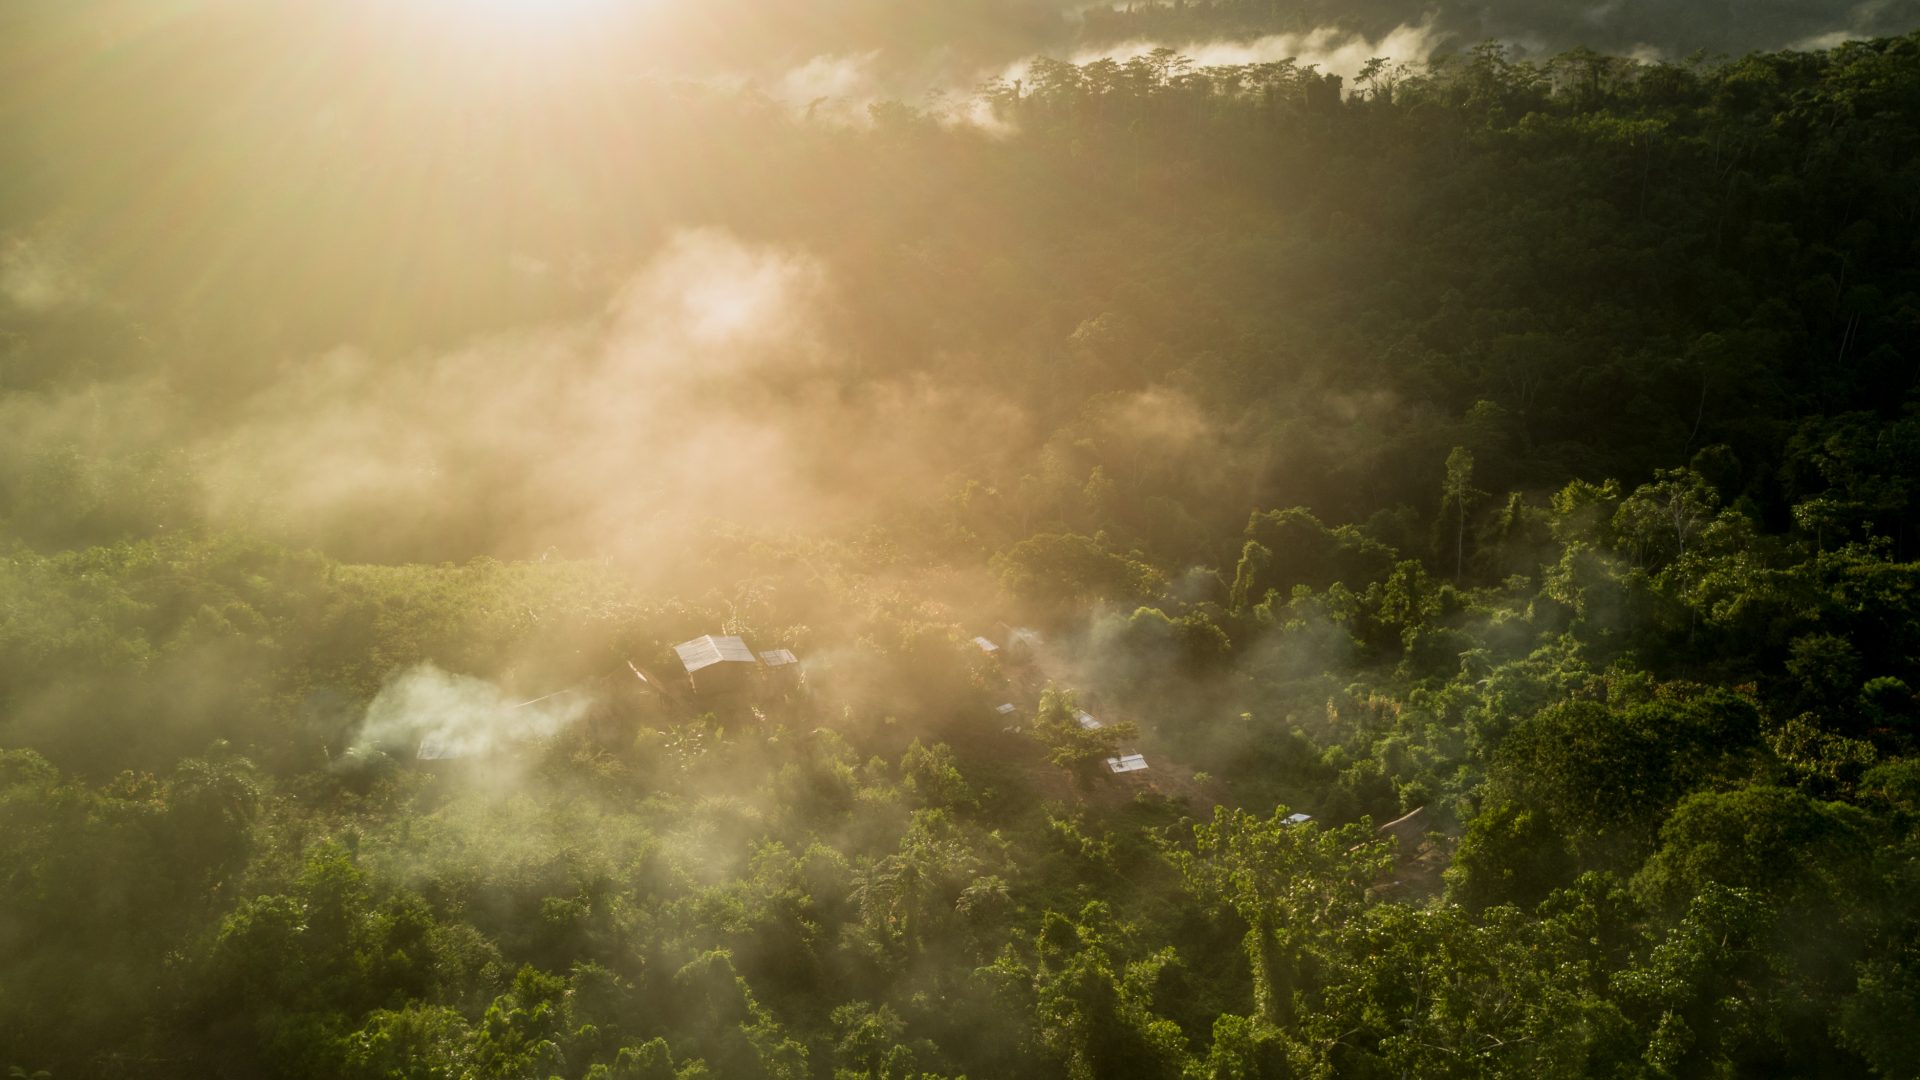 The sun rises over a rainforest village surrounded by trees.